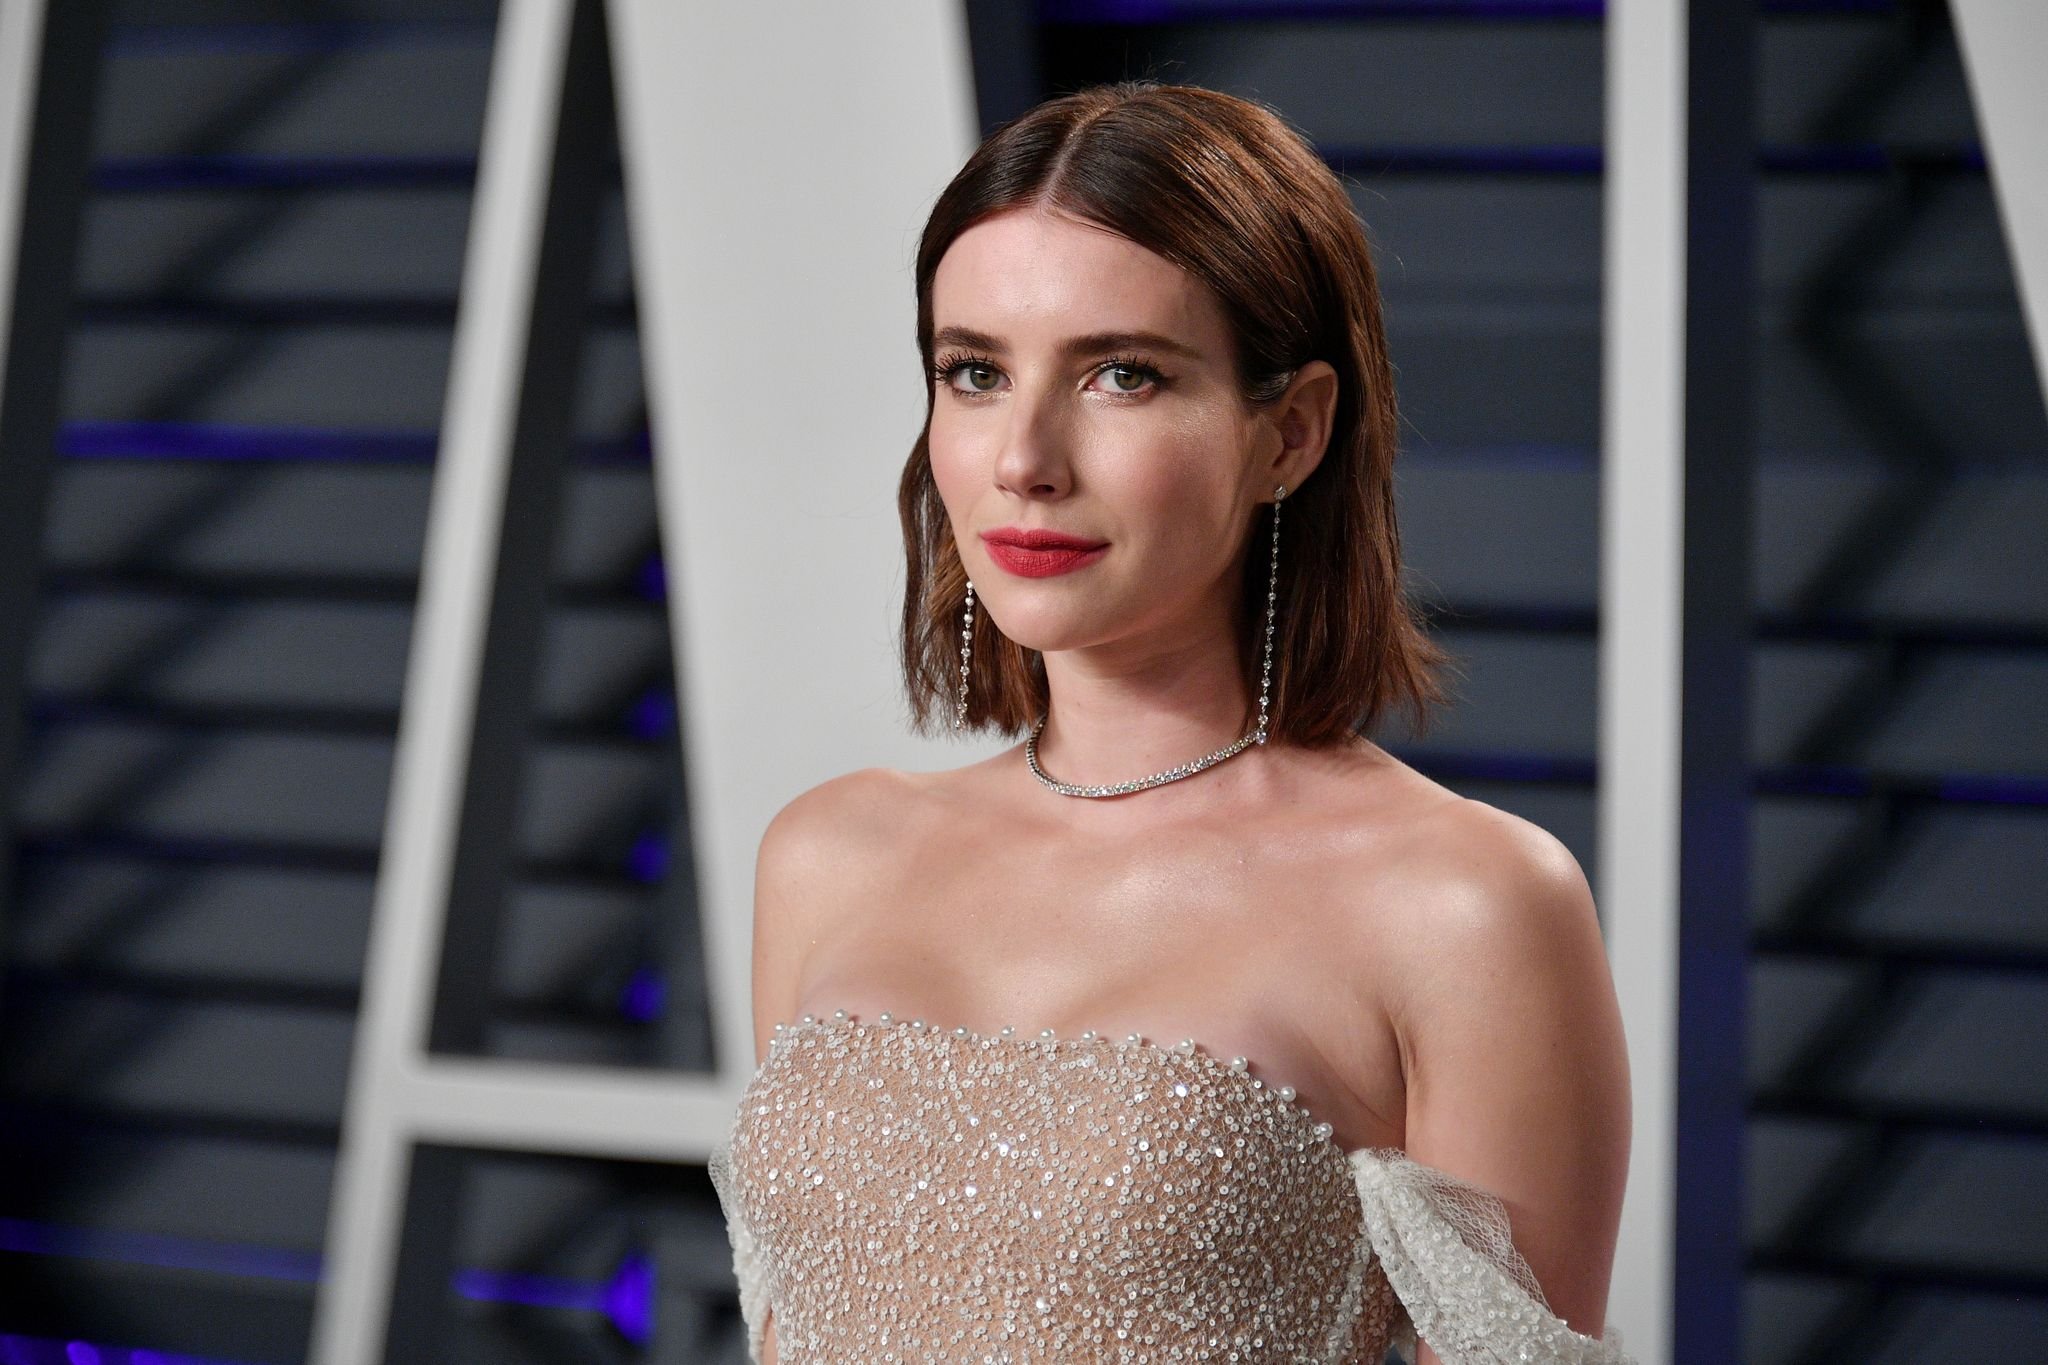 Emma Roberts during the 2019 Vanity Fair Oscar Party hosted by Radhika Jones at Wallis Annenberg Center for the Performing Arts on February 24, 2019 in Beverly Hills, California. | Source: Getty Images